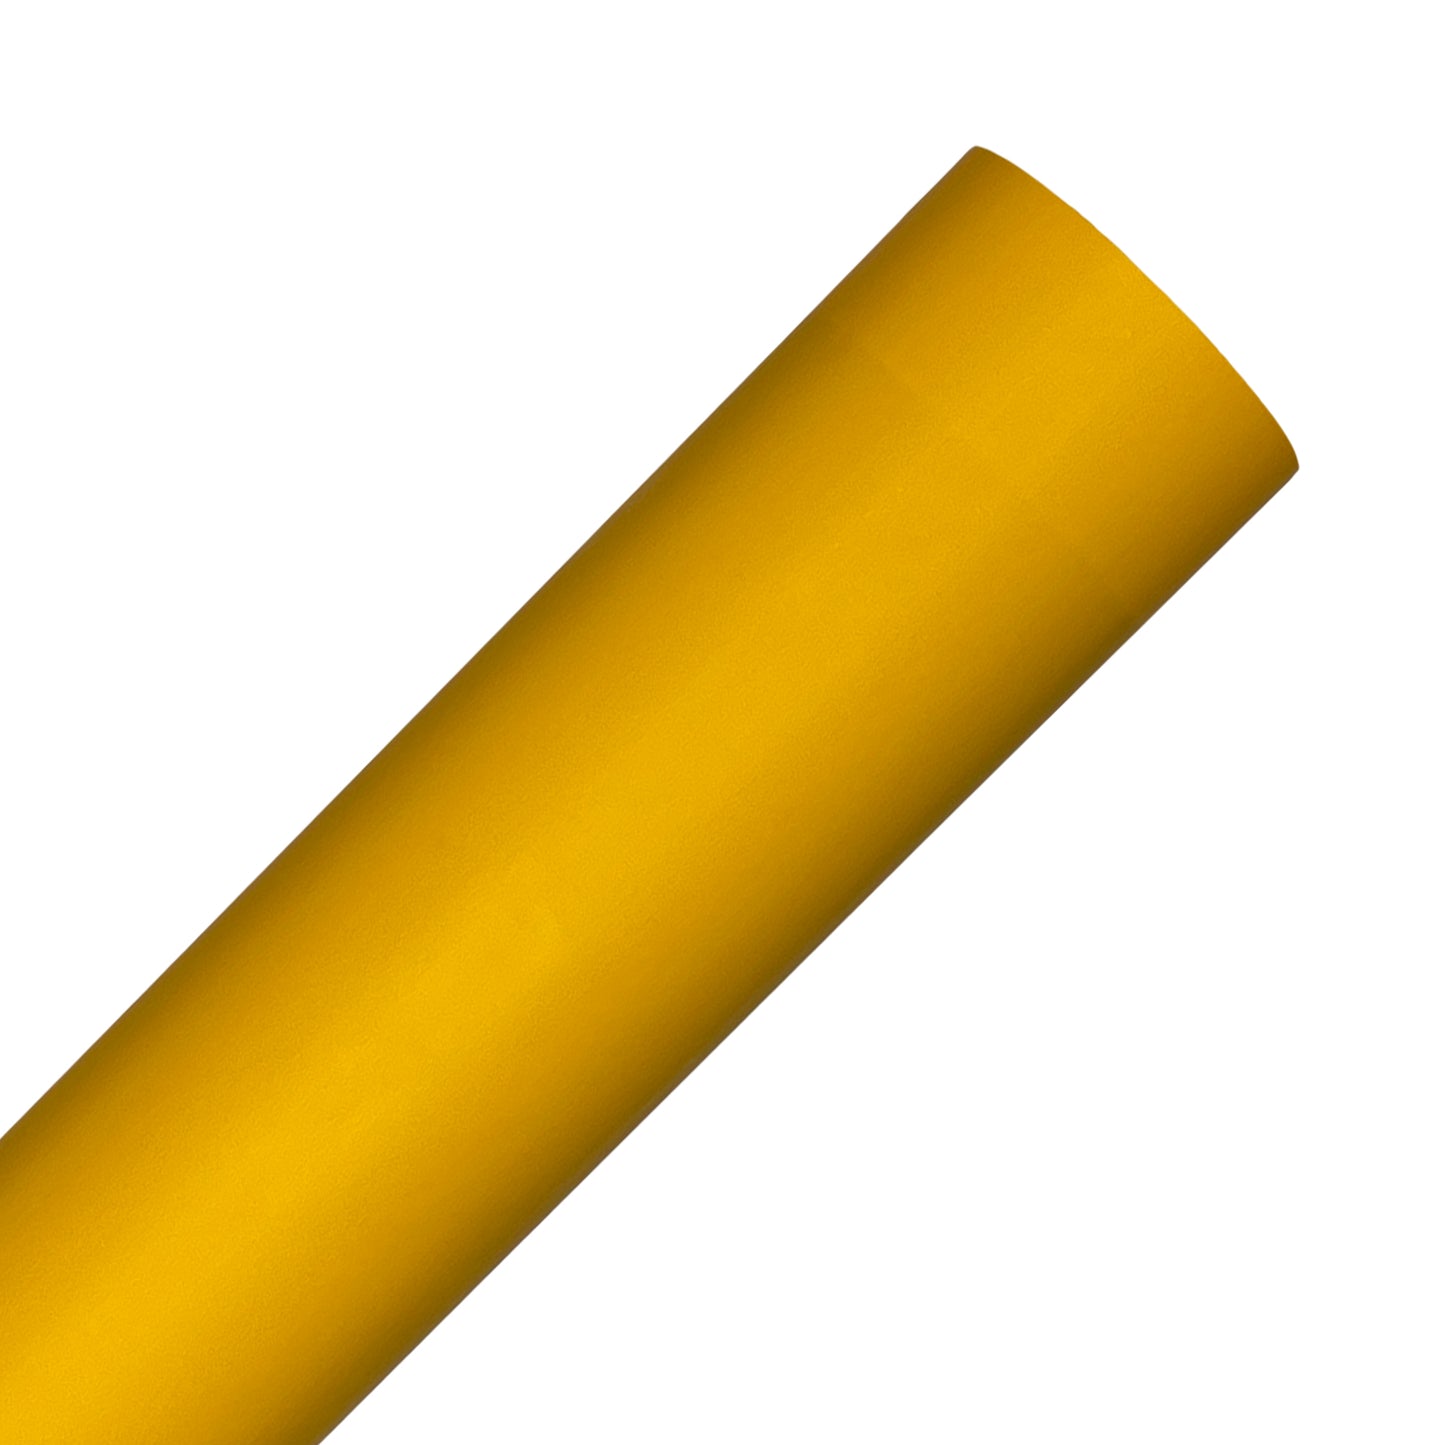 Yellow Silicone Heat Transfer Vinyl Rolls By Craftables